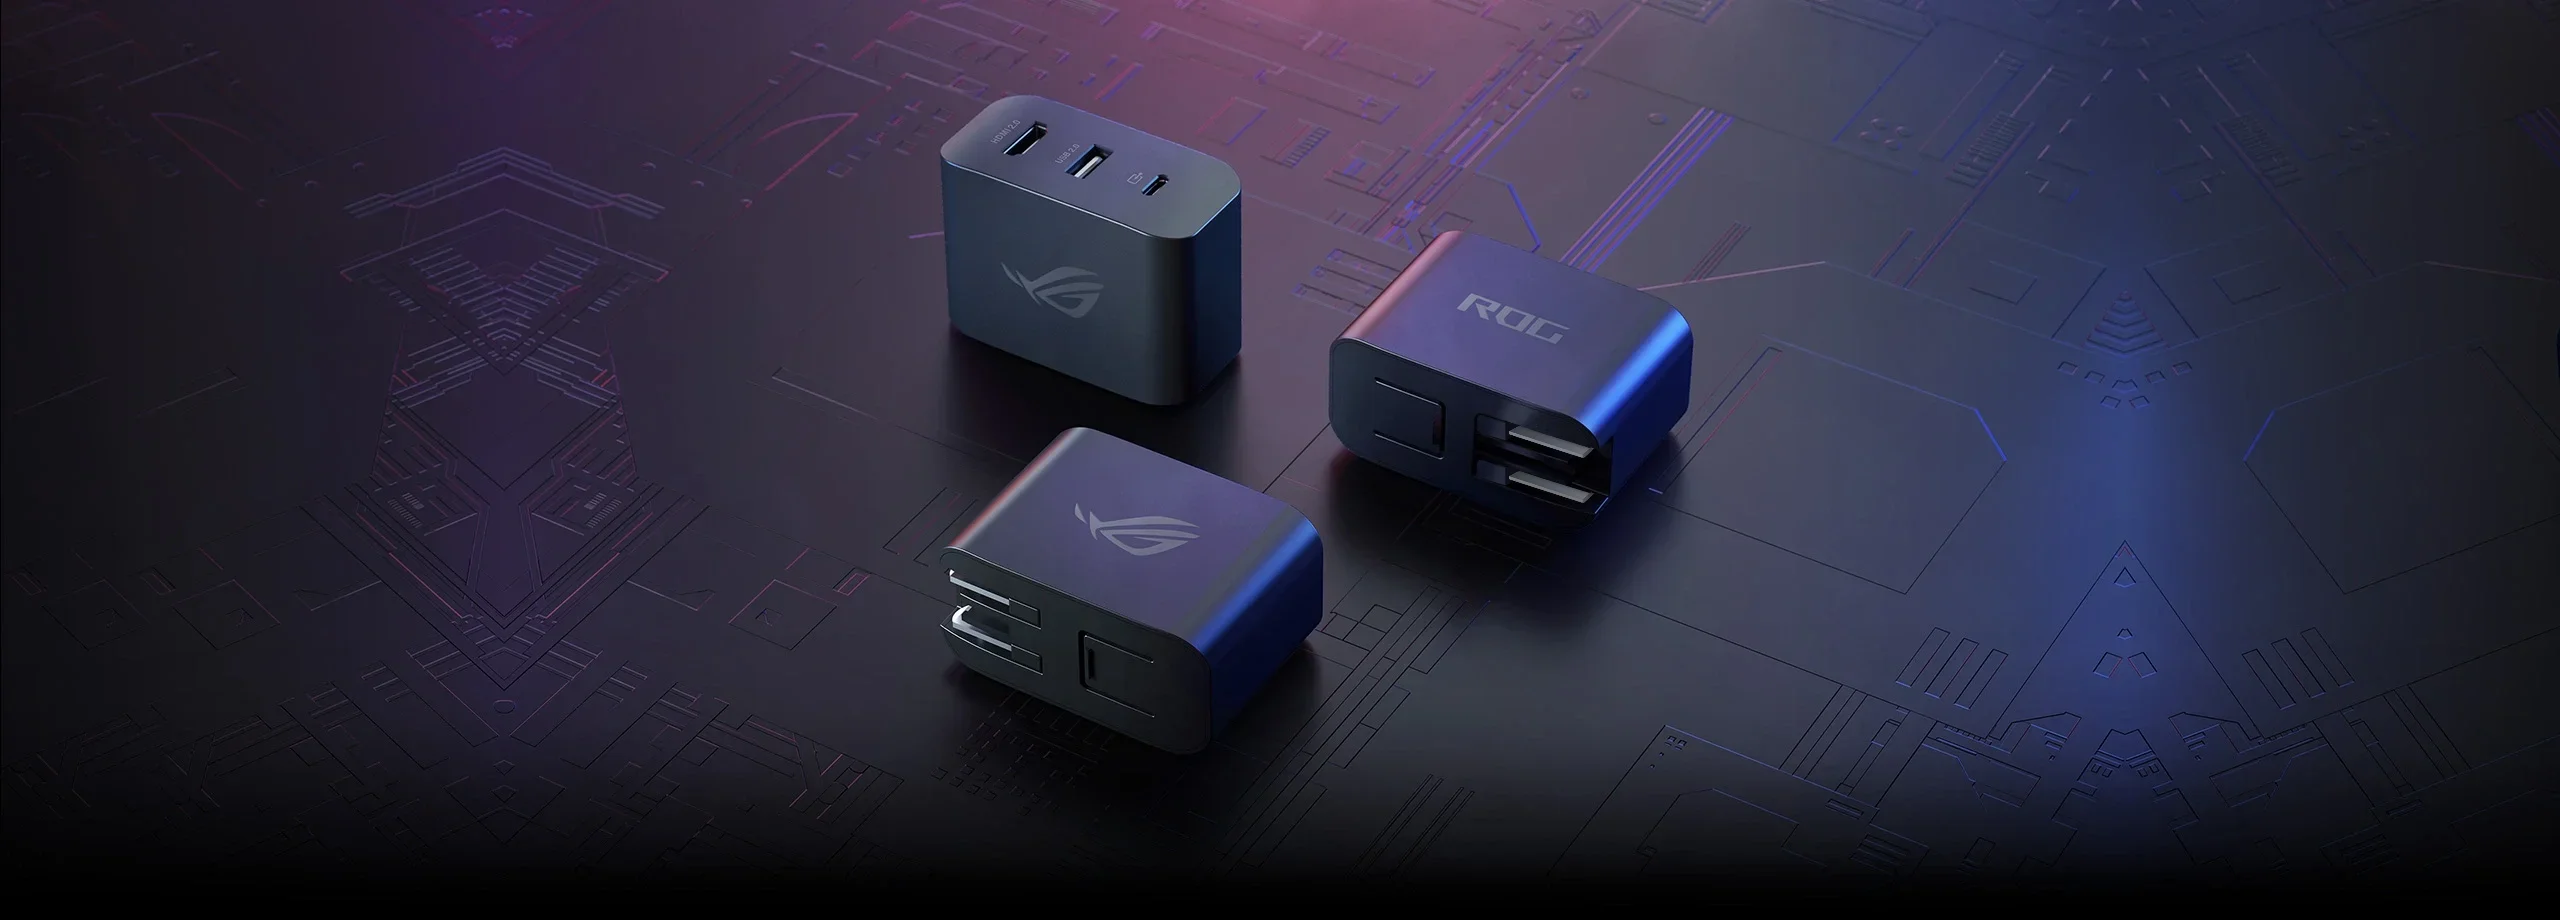 Three ROG Gaming Charger Docks, one with the ports visible, and the other two with the lettering “ROG” and the ROG logo visible, respectively.